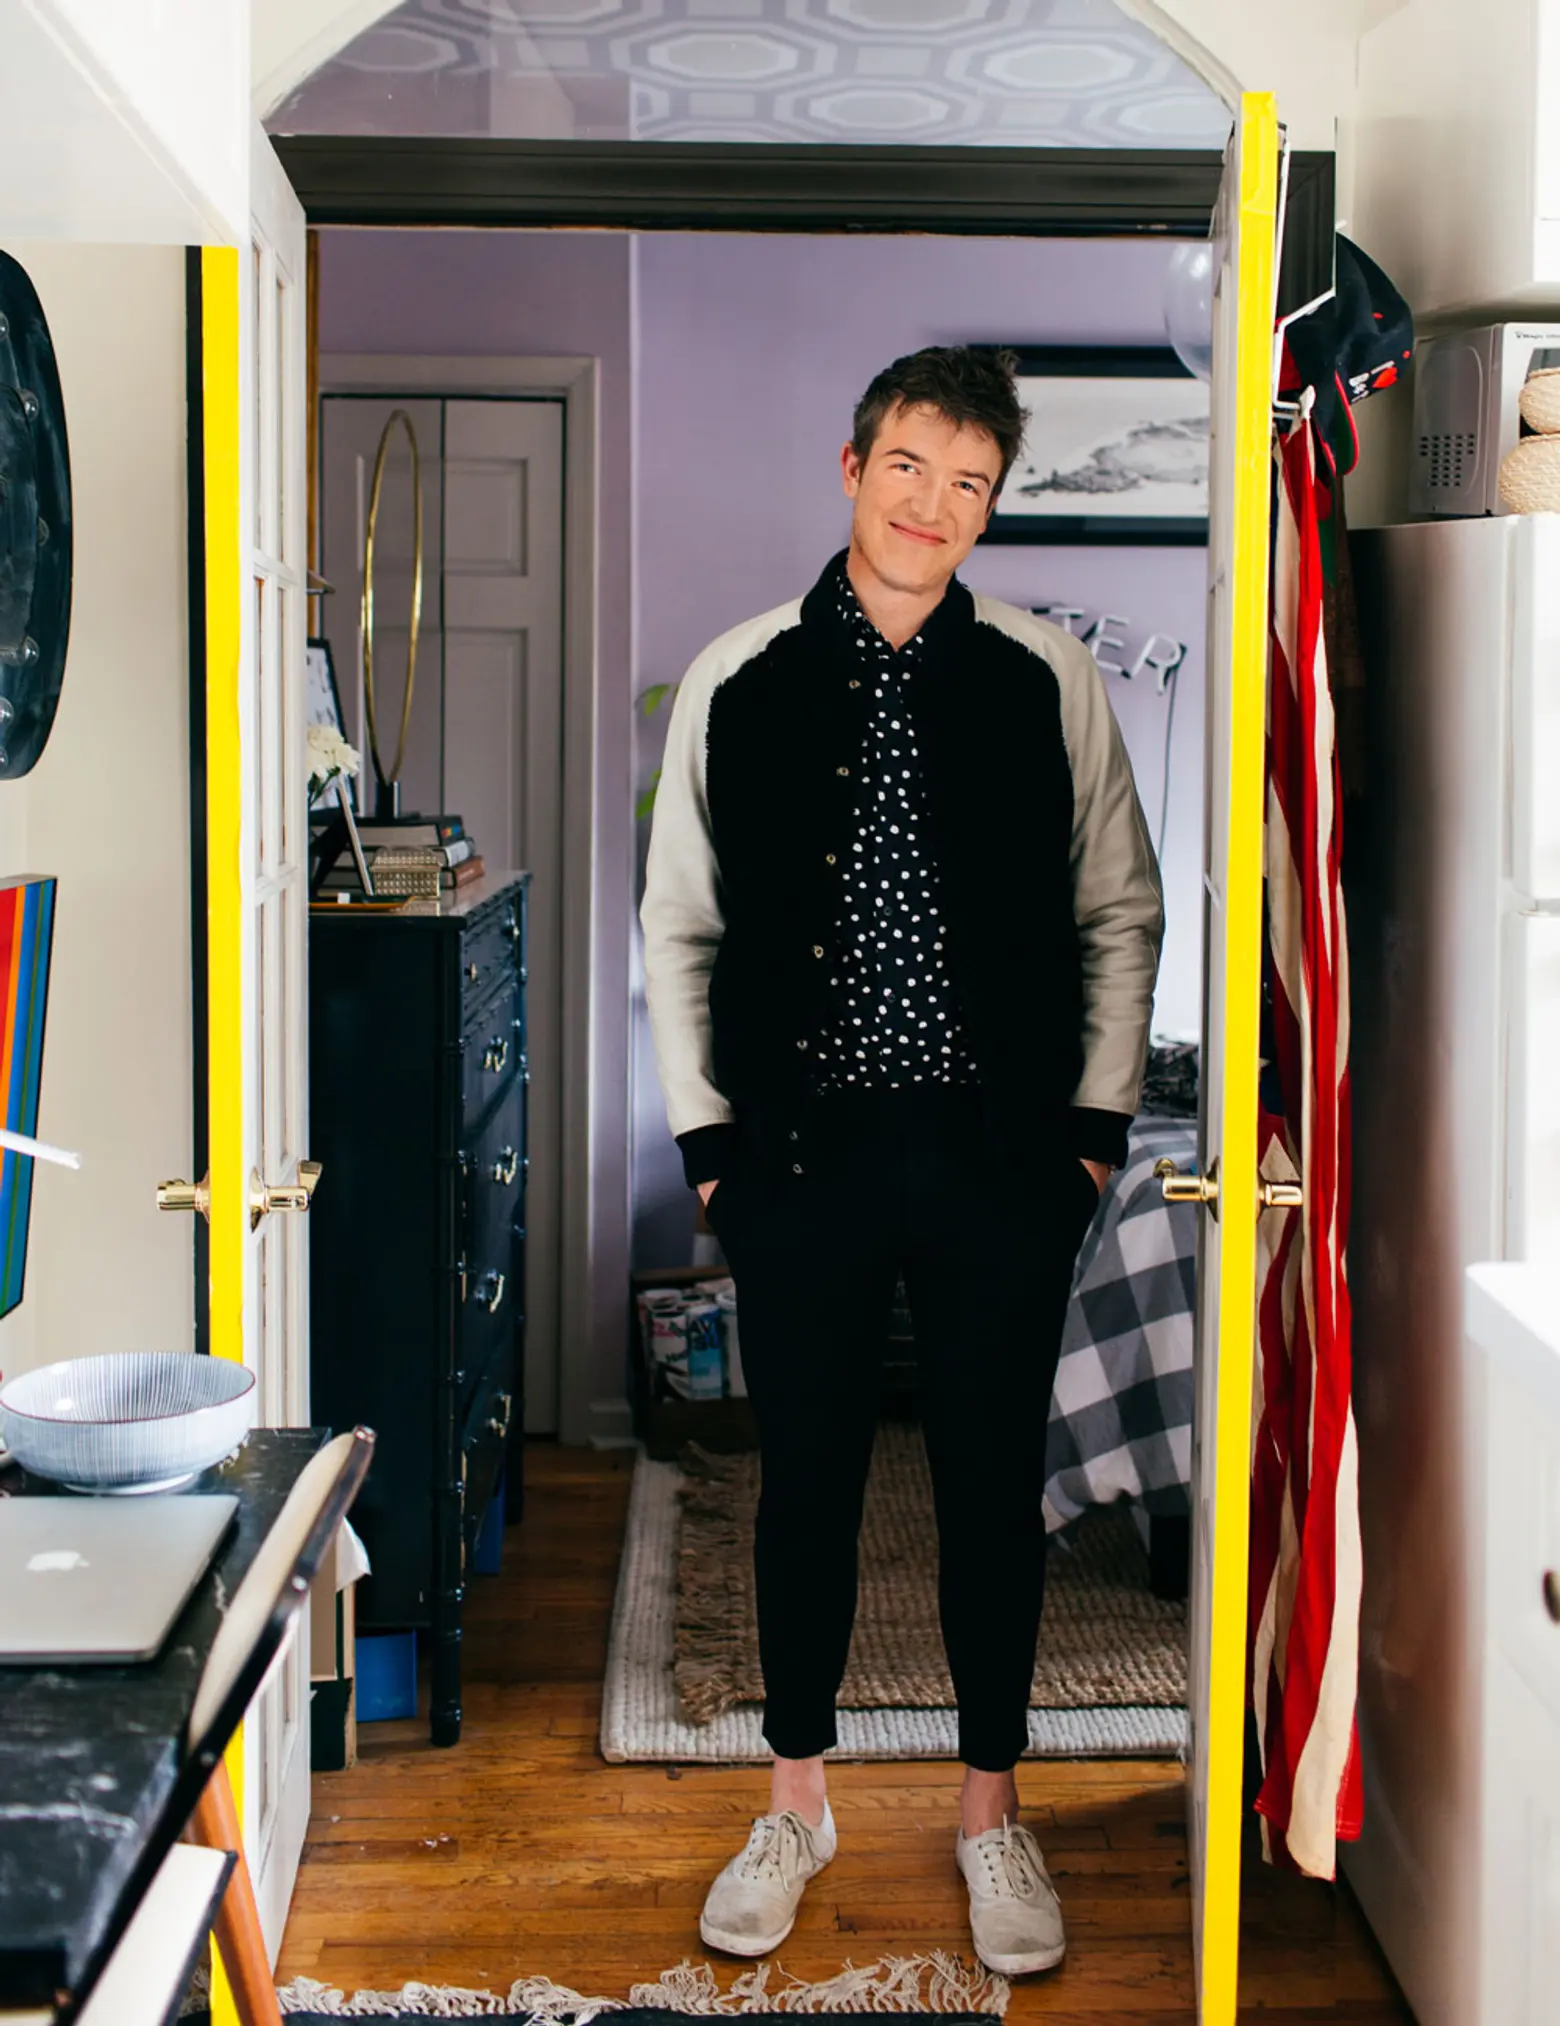 My 275sqft: Inside a Creative Director’s Chic Lower East Side Micro-Apartment